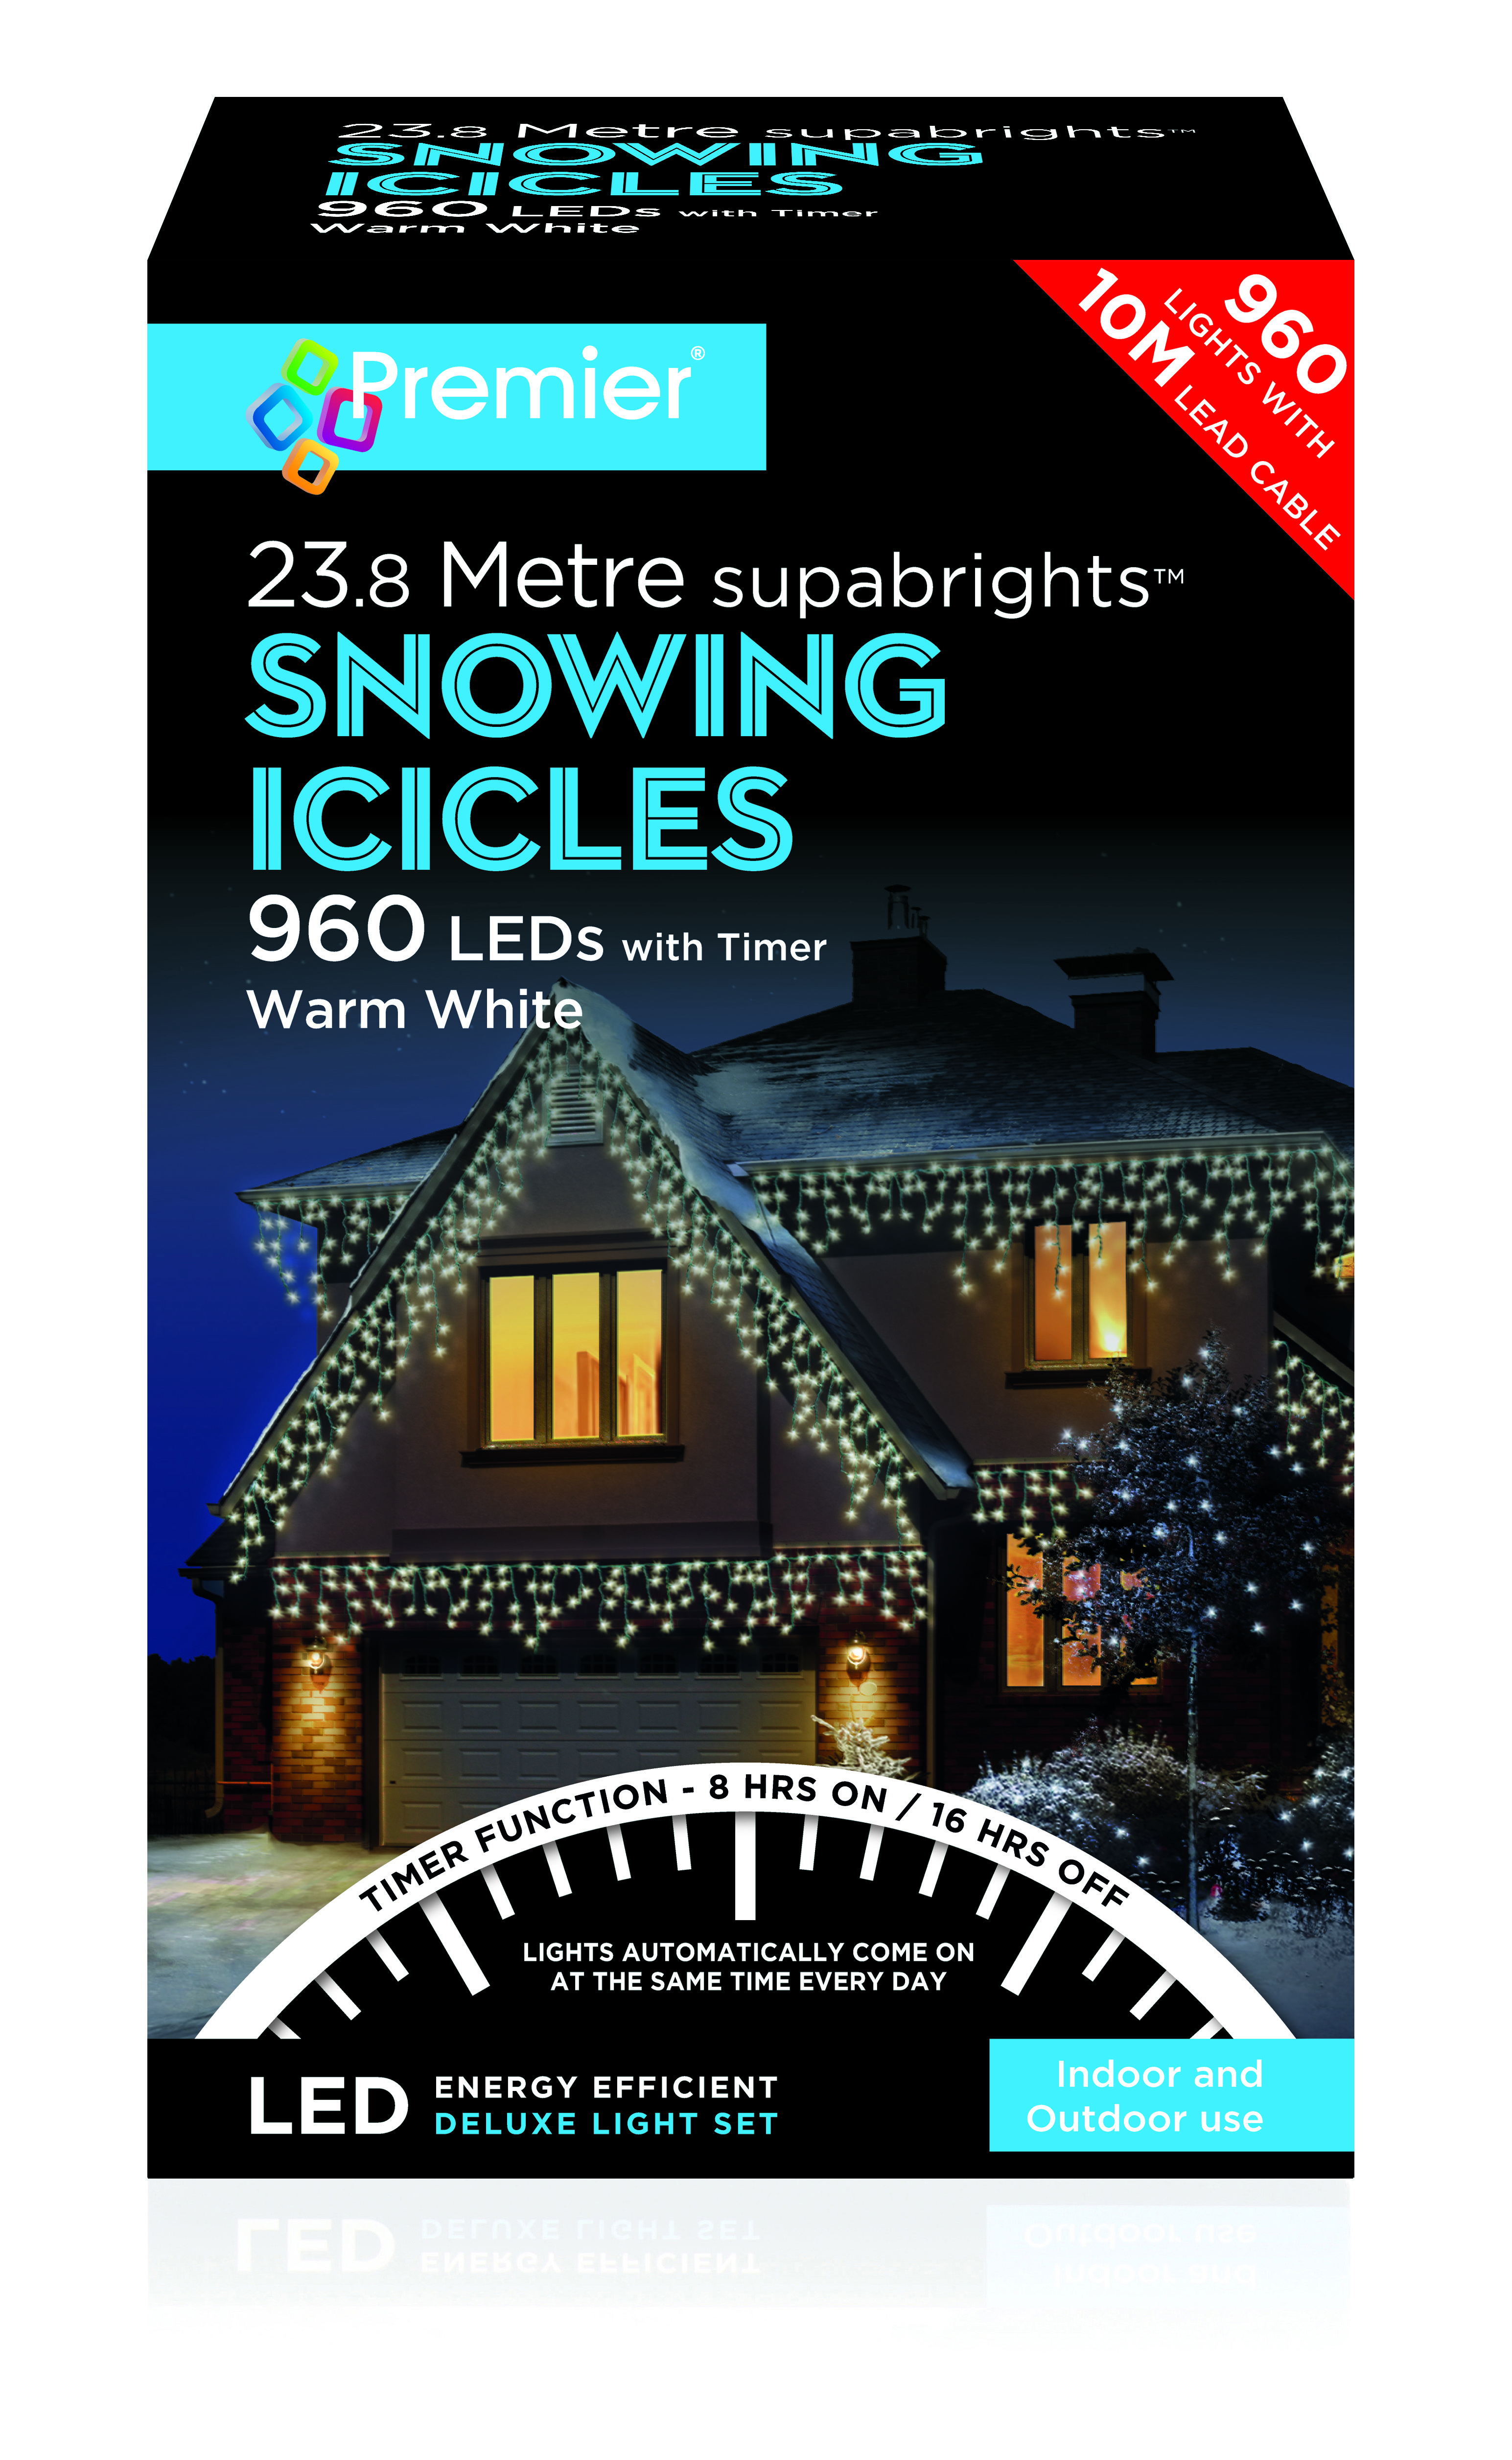 Premier Snowing Icicles Superbrights Warm White 960 Lights